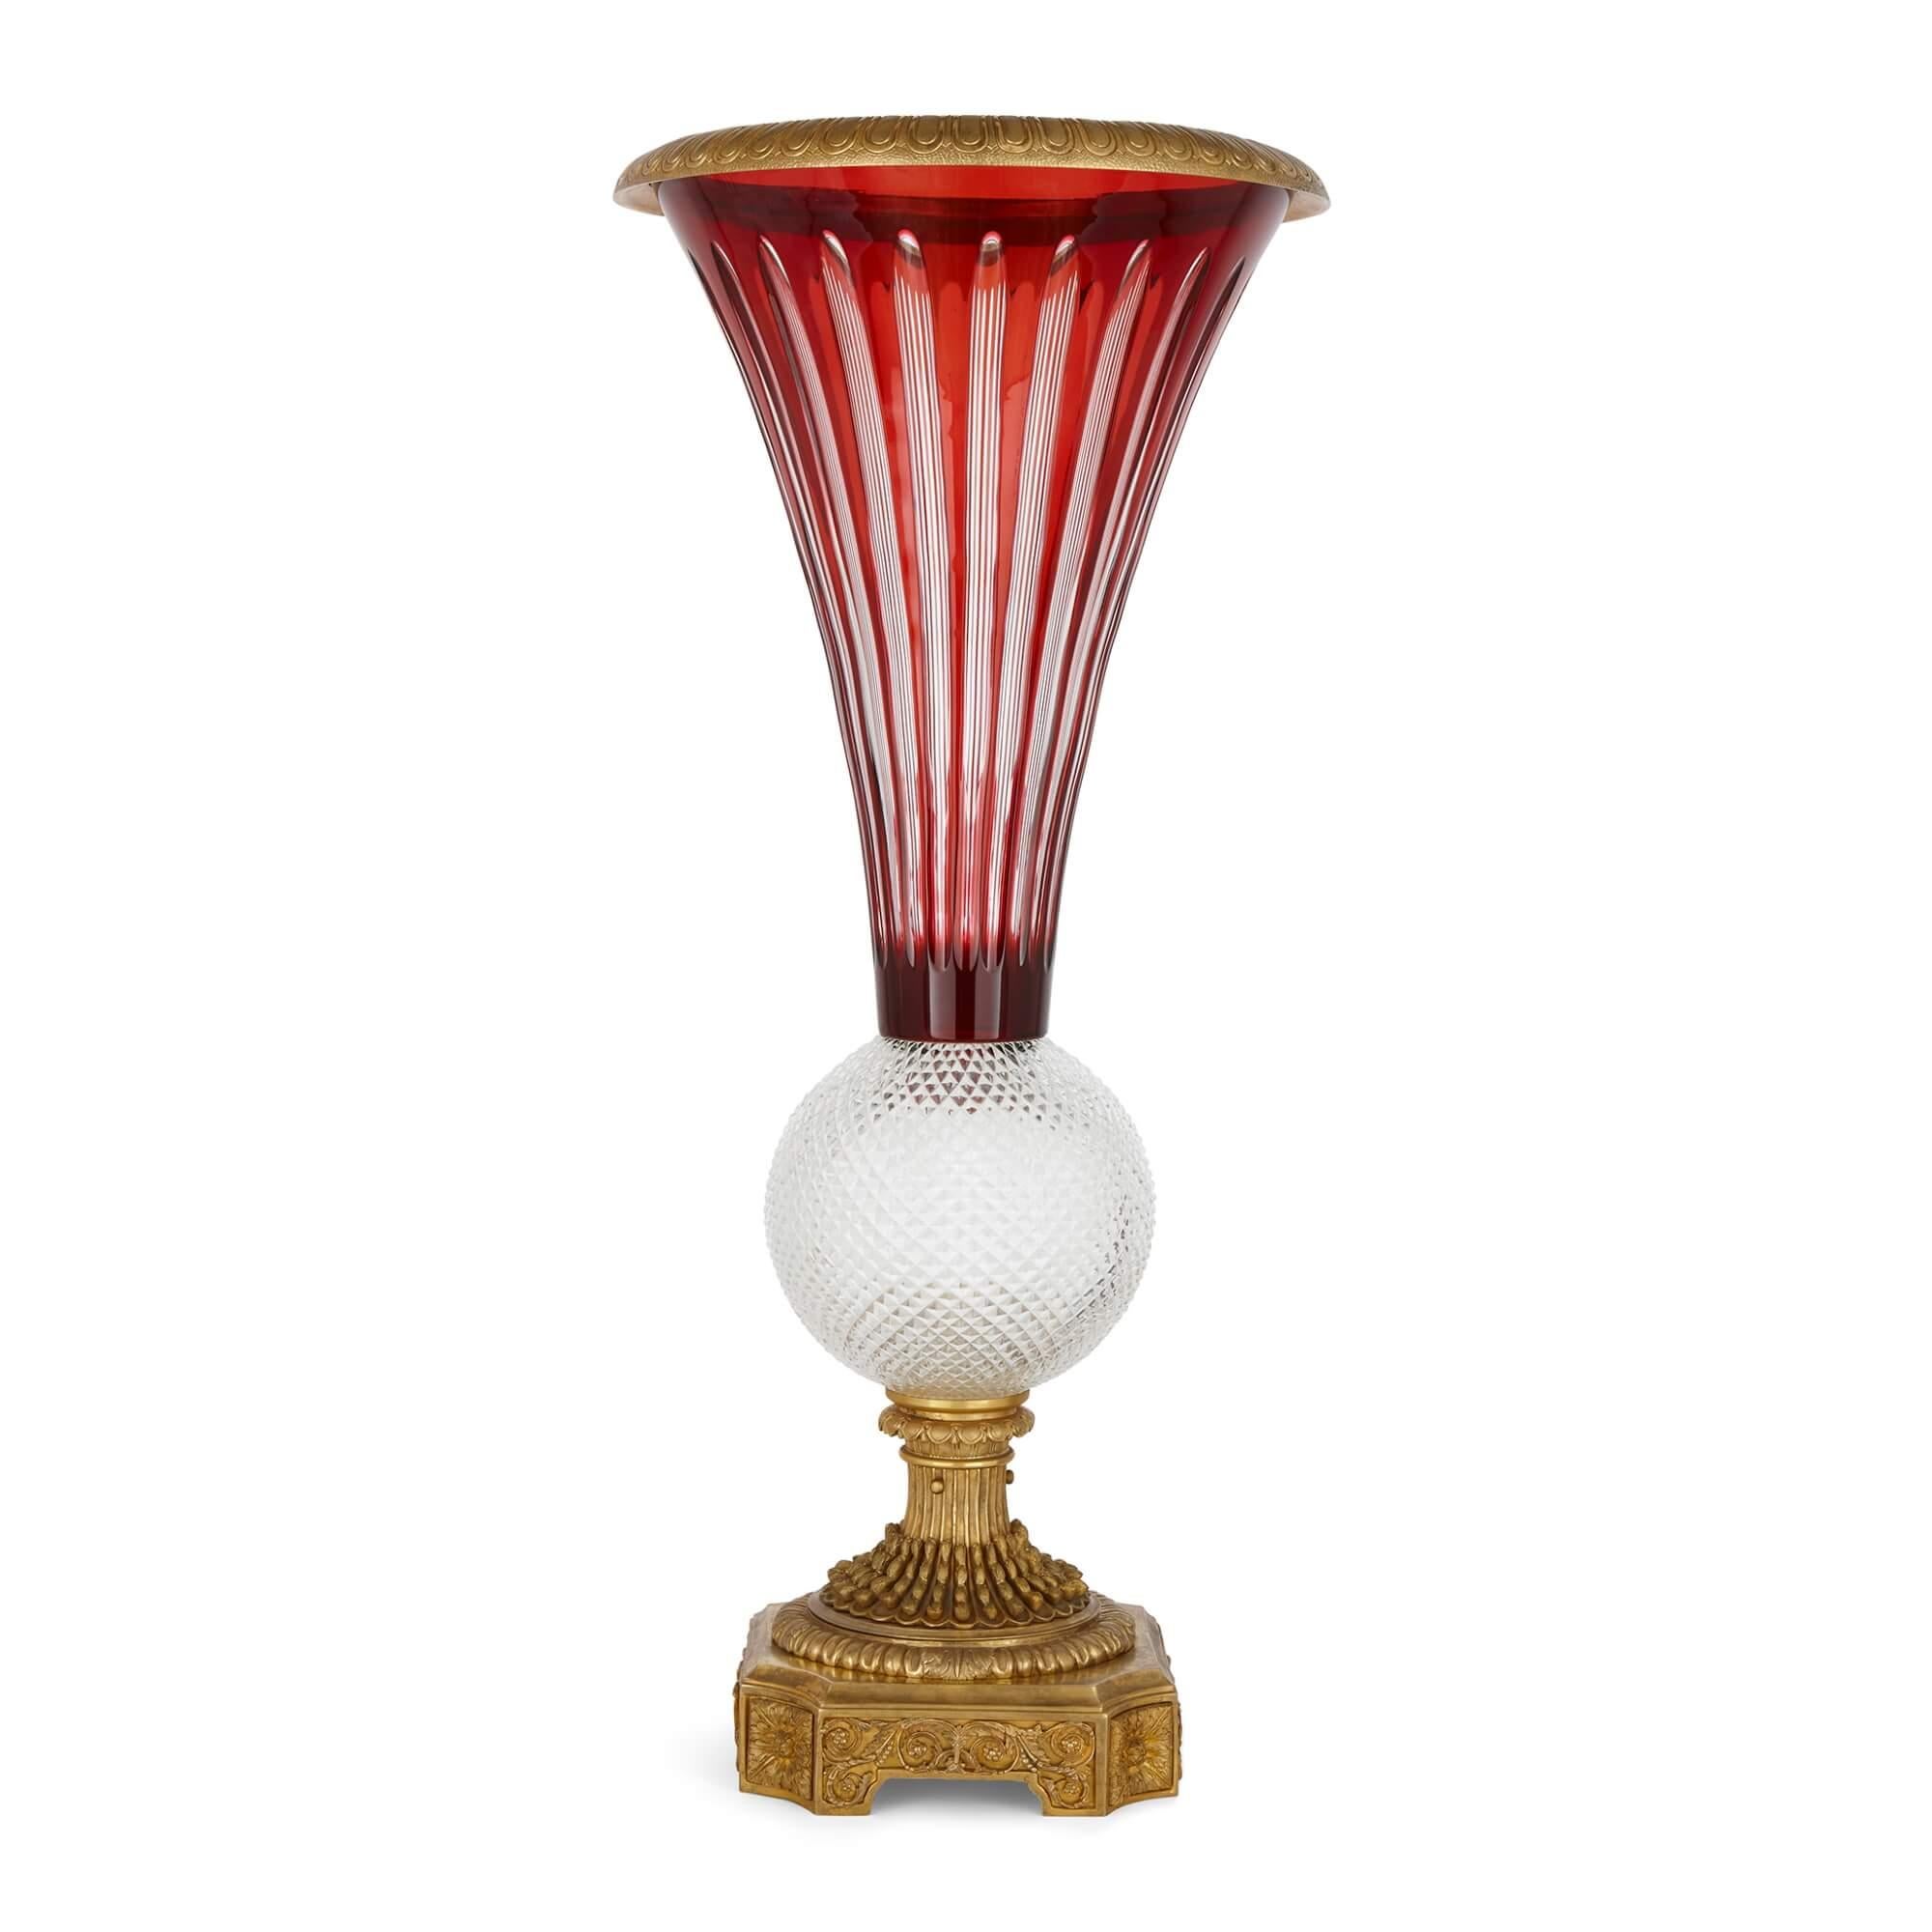 Large gilt bronze, ruby red and clear cut glass vase 
French, 20th century 
Height 80cm, diameter 36cm

The brightly coloured ruby red glass fluted body of the vase, is adorned with delicate clear glass detailing. The vase terminates in a tulip